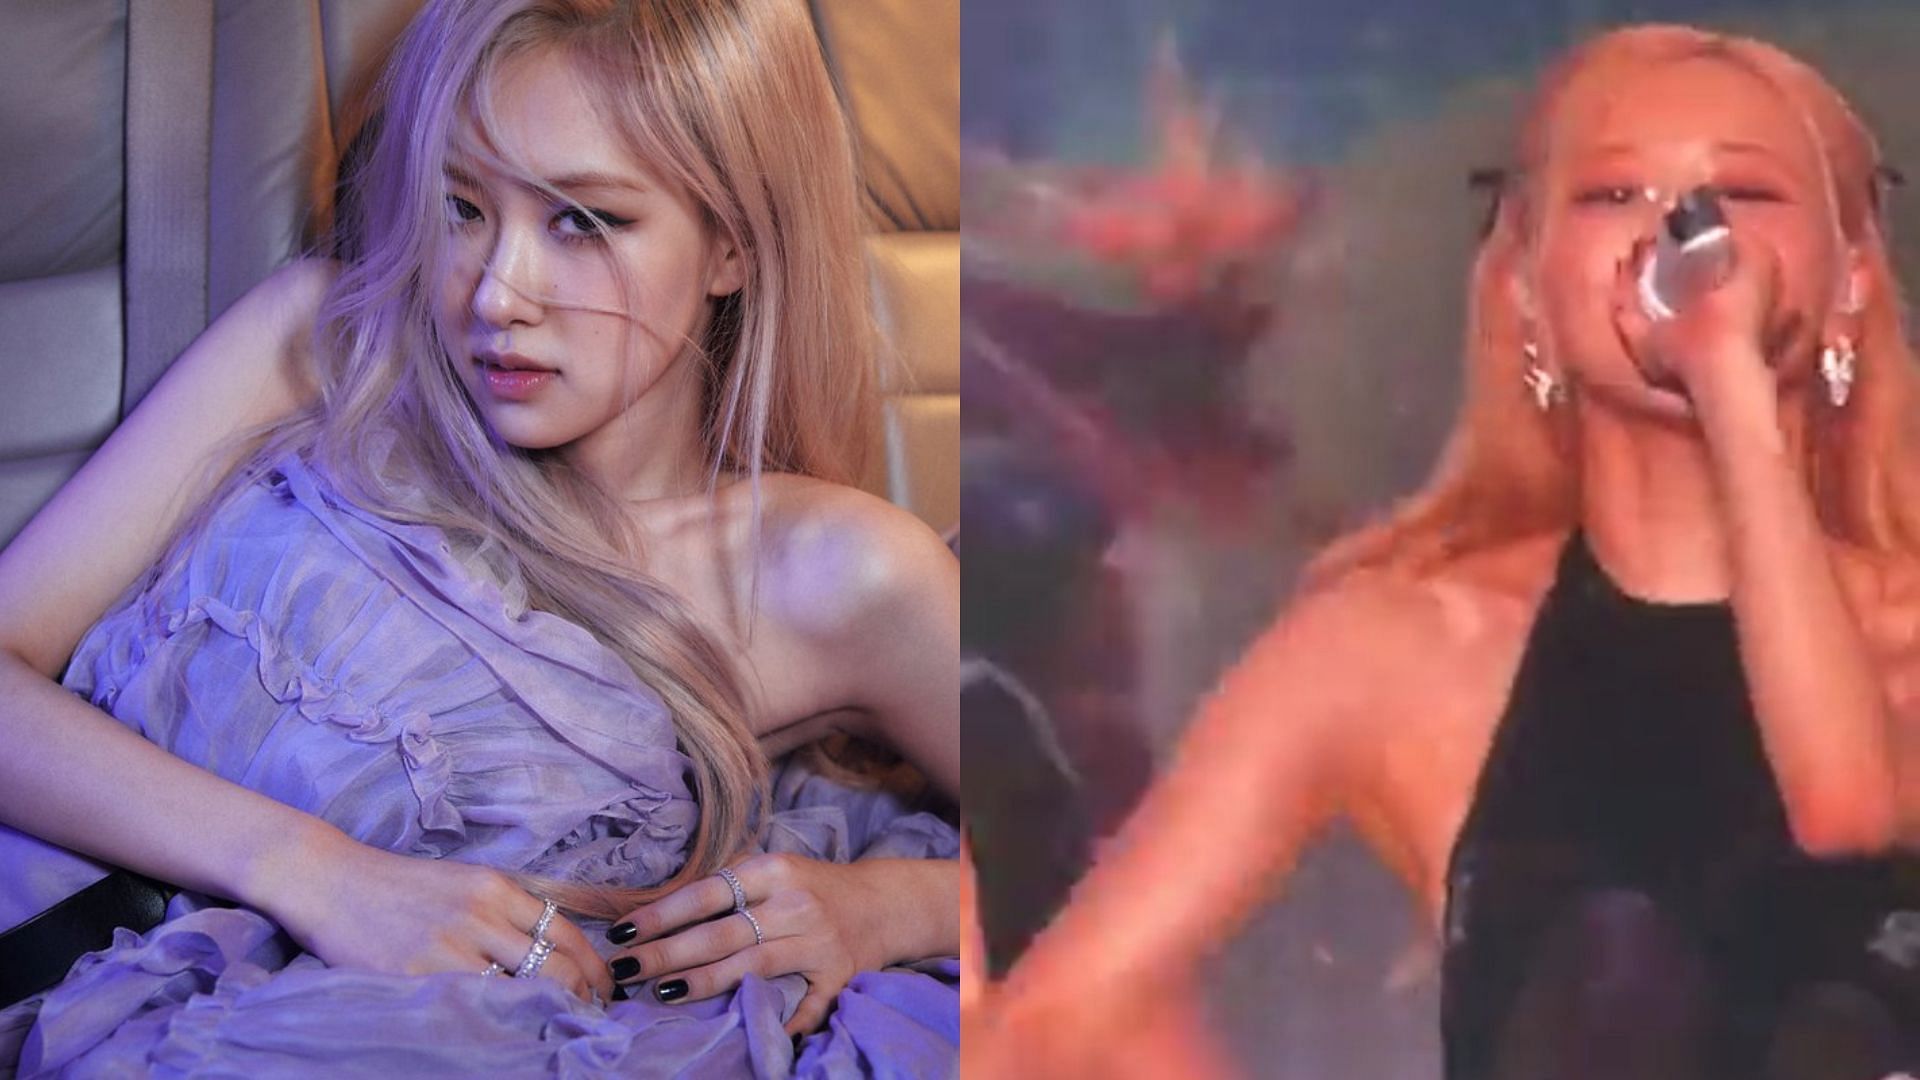 BLACKPINK&rsquo;s Ros&eacute; earned praise for handling a wardrobe malfunction situation so professionally (Image via Twitter/@AboutMusicYT @rosedailypics)